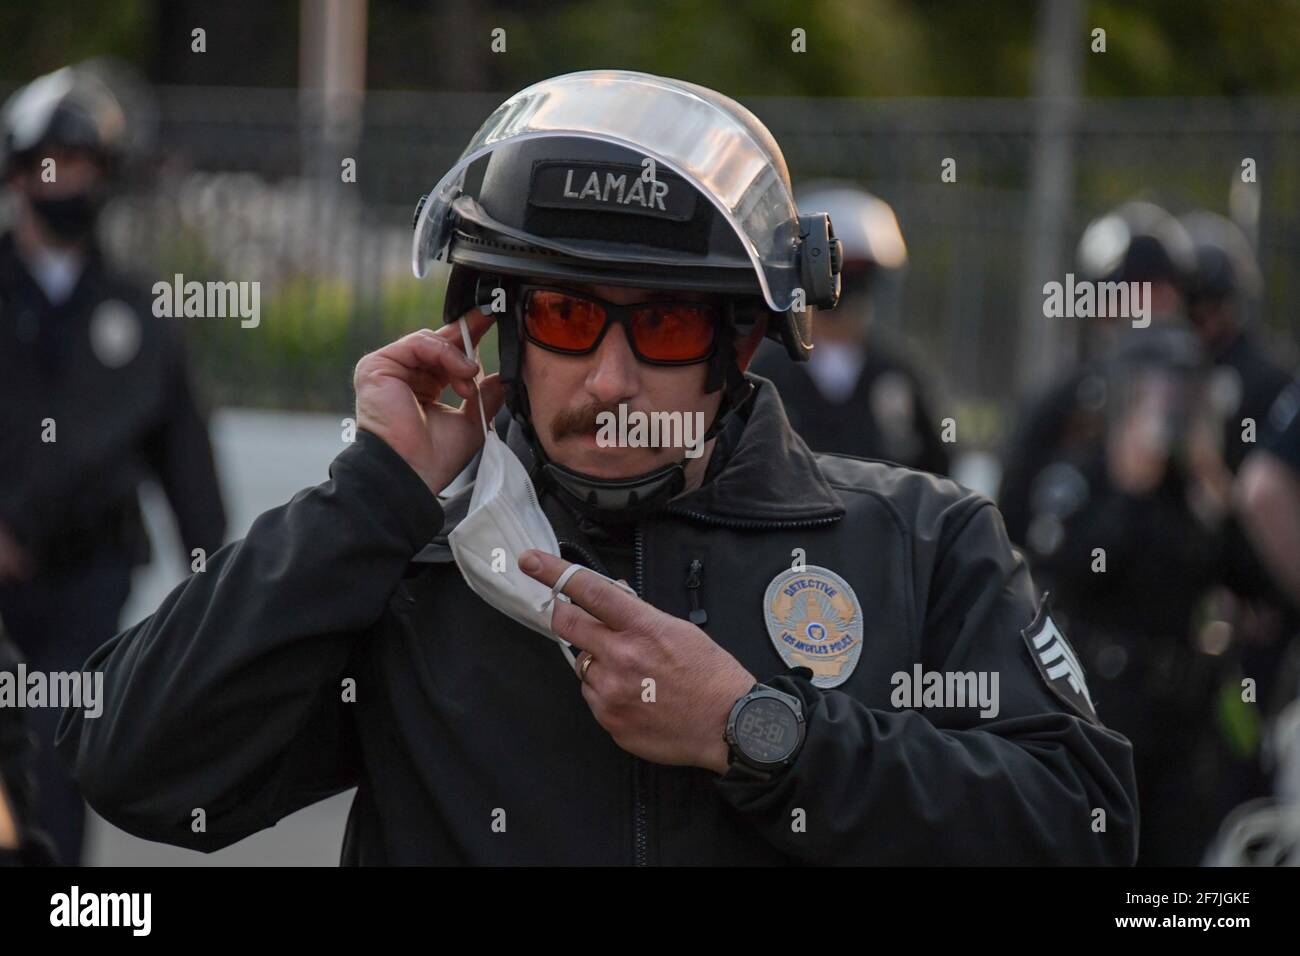 Los Angeles Police Department detective Lamar adjusts a facial covering while responding to a protest near the Echo Park Lake, Thursday, Mar 25, 2021 Stock Photo